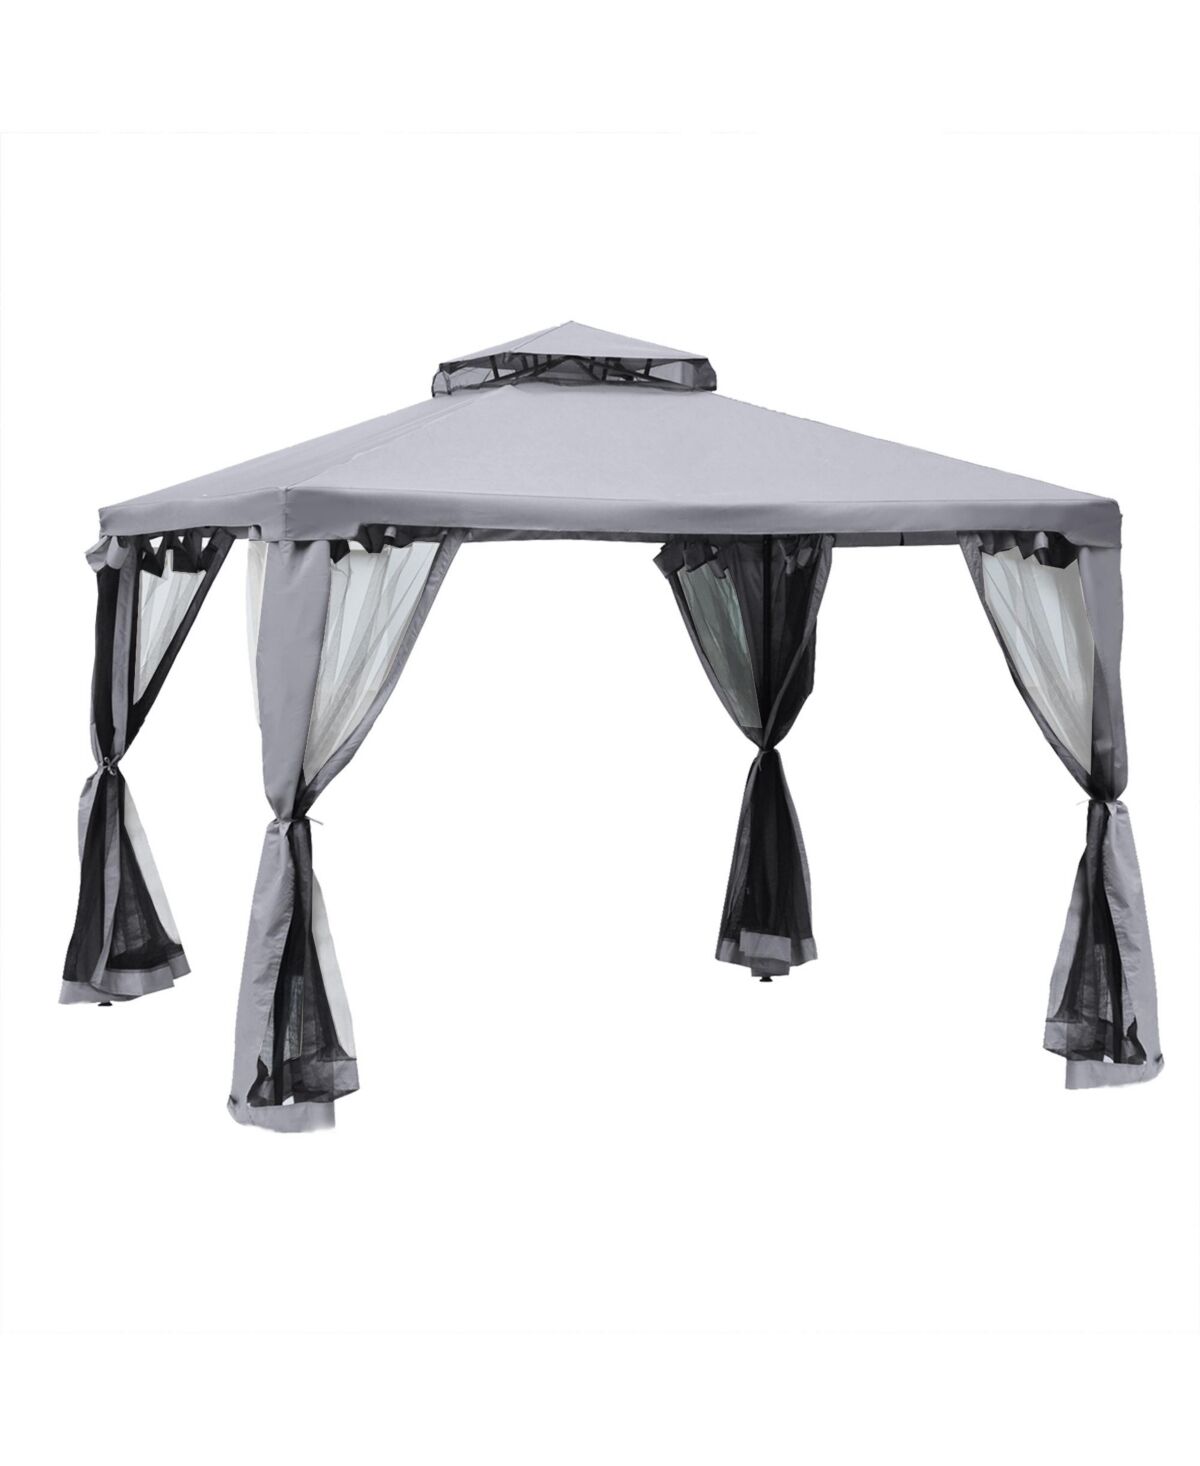 Outsunny 10' x 10' Patio Gazebo Outdoor Canopy Shelter with 2-Tier Roof and Netting, Steel Frame for Garden, Lawn, Backyard and Deck, Grey - Grey